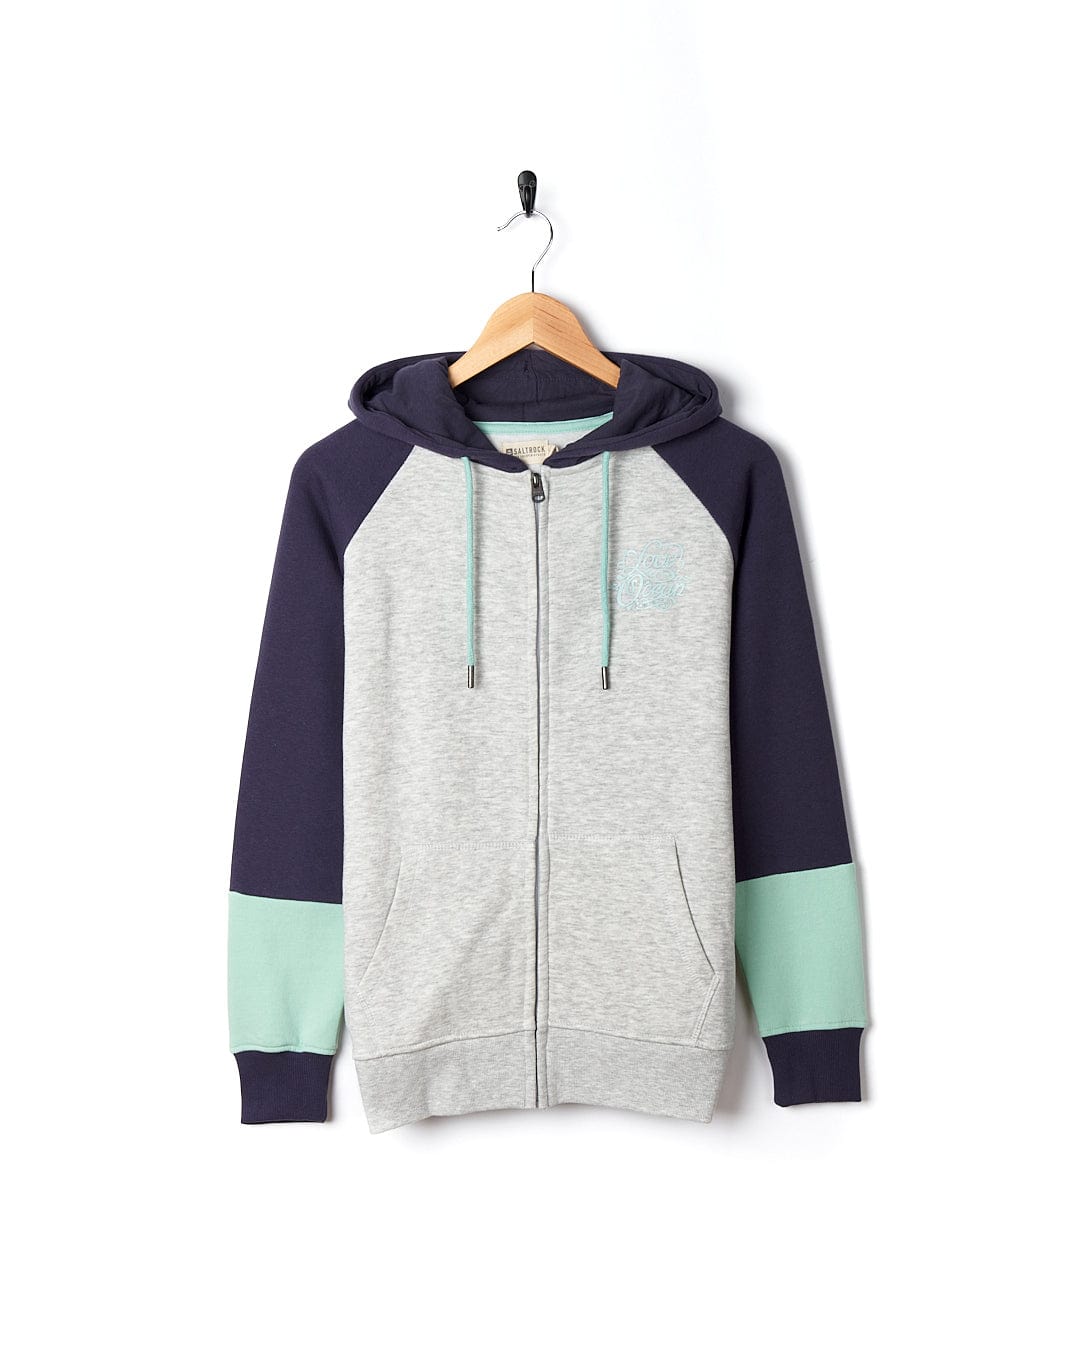 A Jan - Womens Zip Hoodie - Grey with a blue and green hood, perfect for effortless style. Brand: Saltrock.